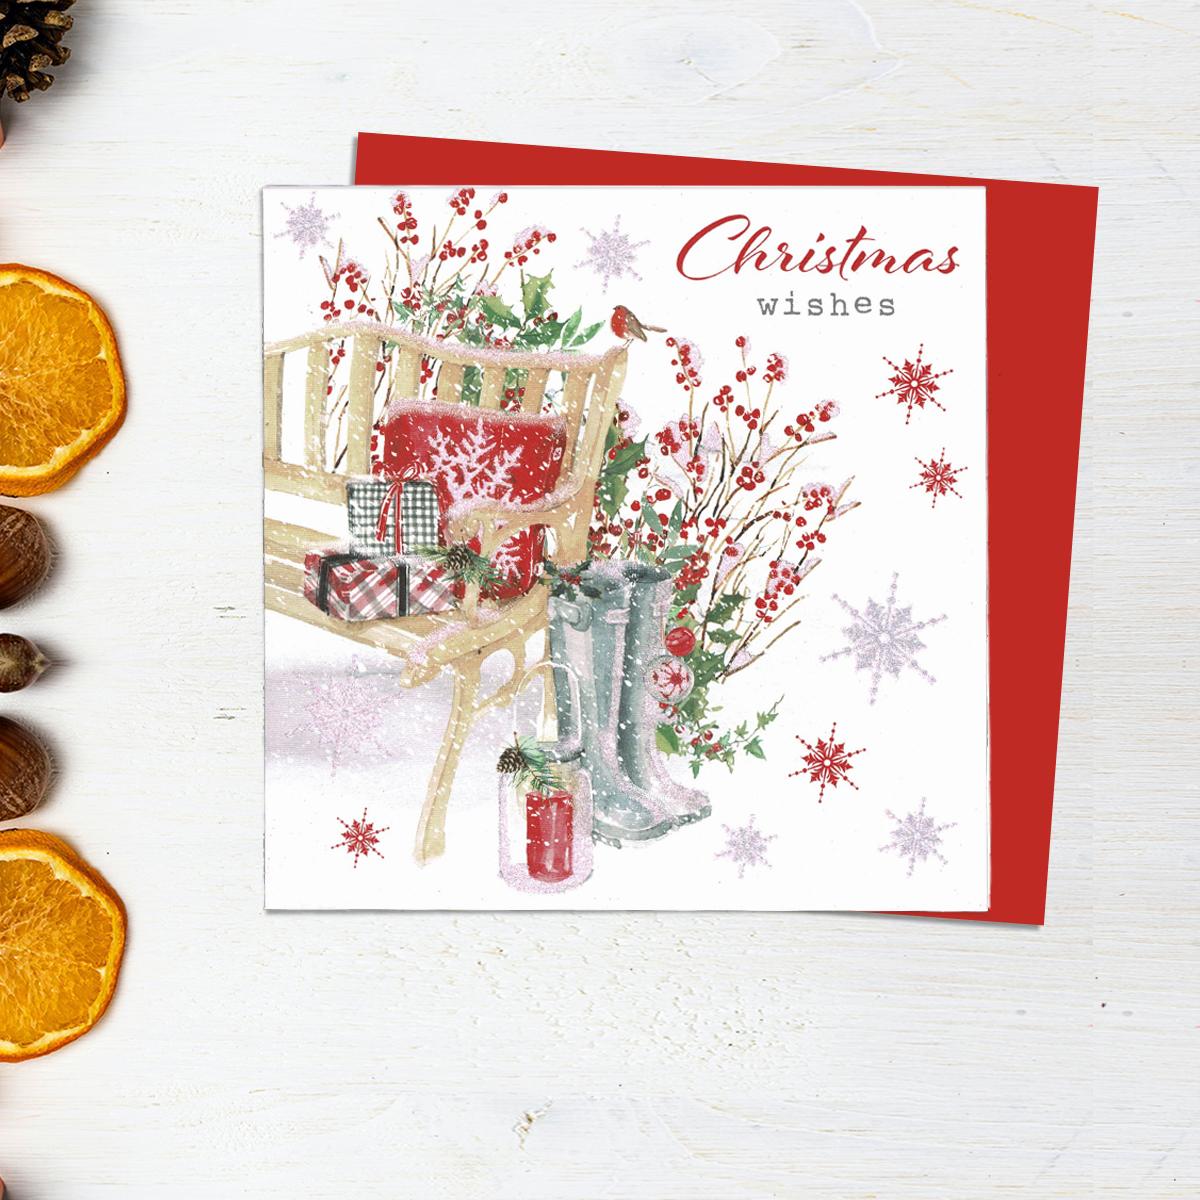 Christmas Wishes Featuring A Garden bench With Wellies! Finished with Sparkle and Red Envelope